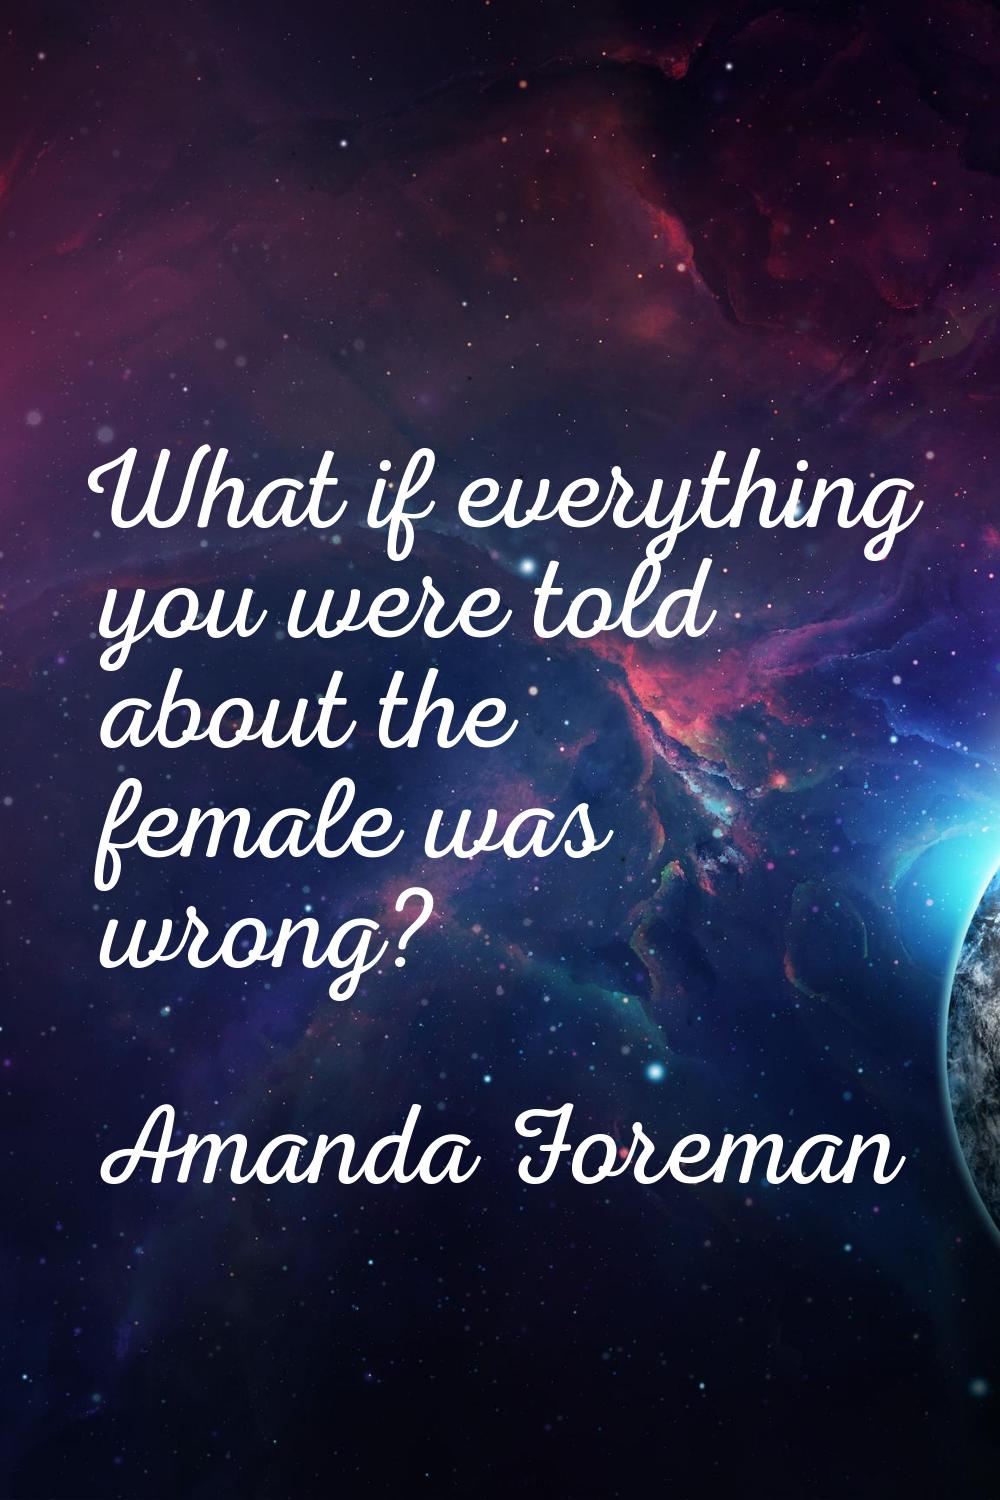 What if everything you were told about the female was wrong?